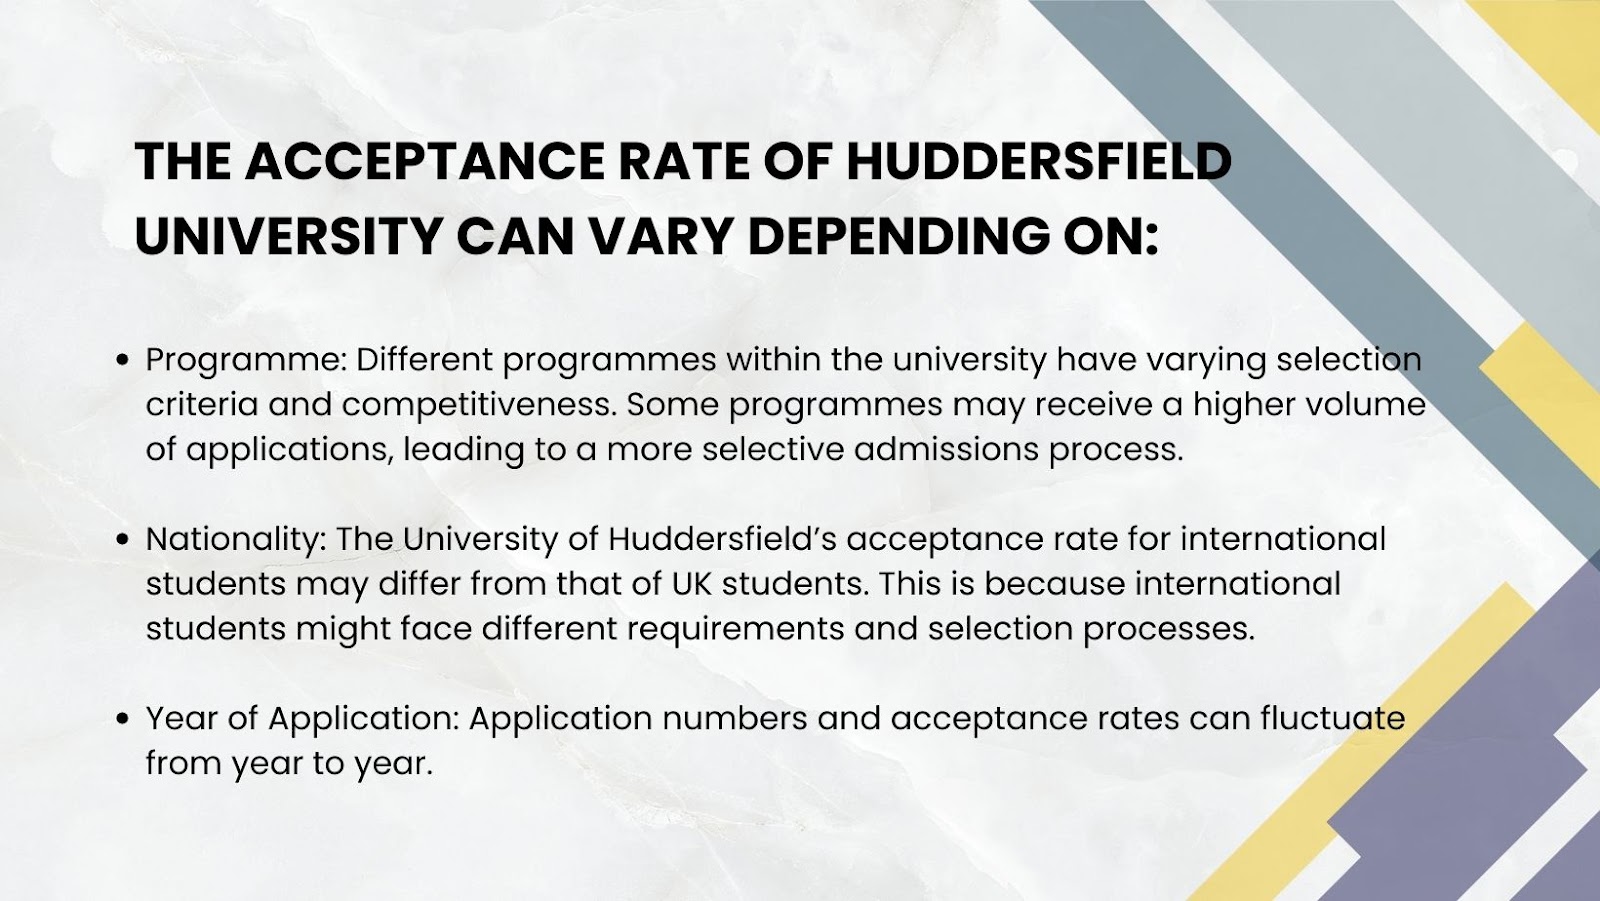 The University of Huddersfield acceptance rate can depend on these factors.